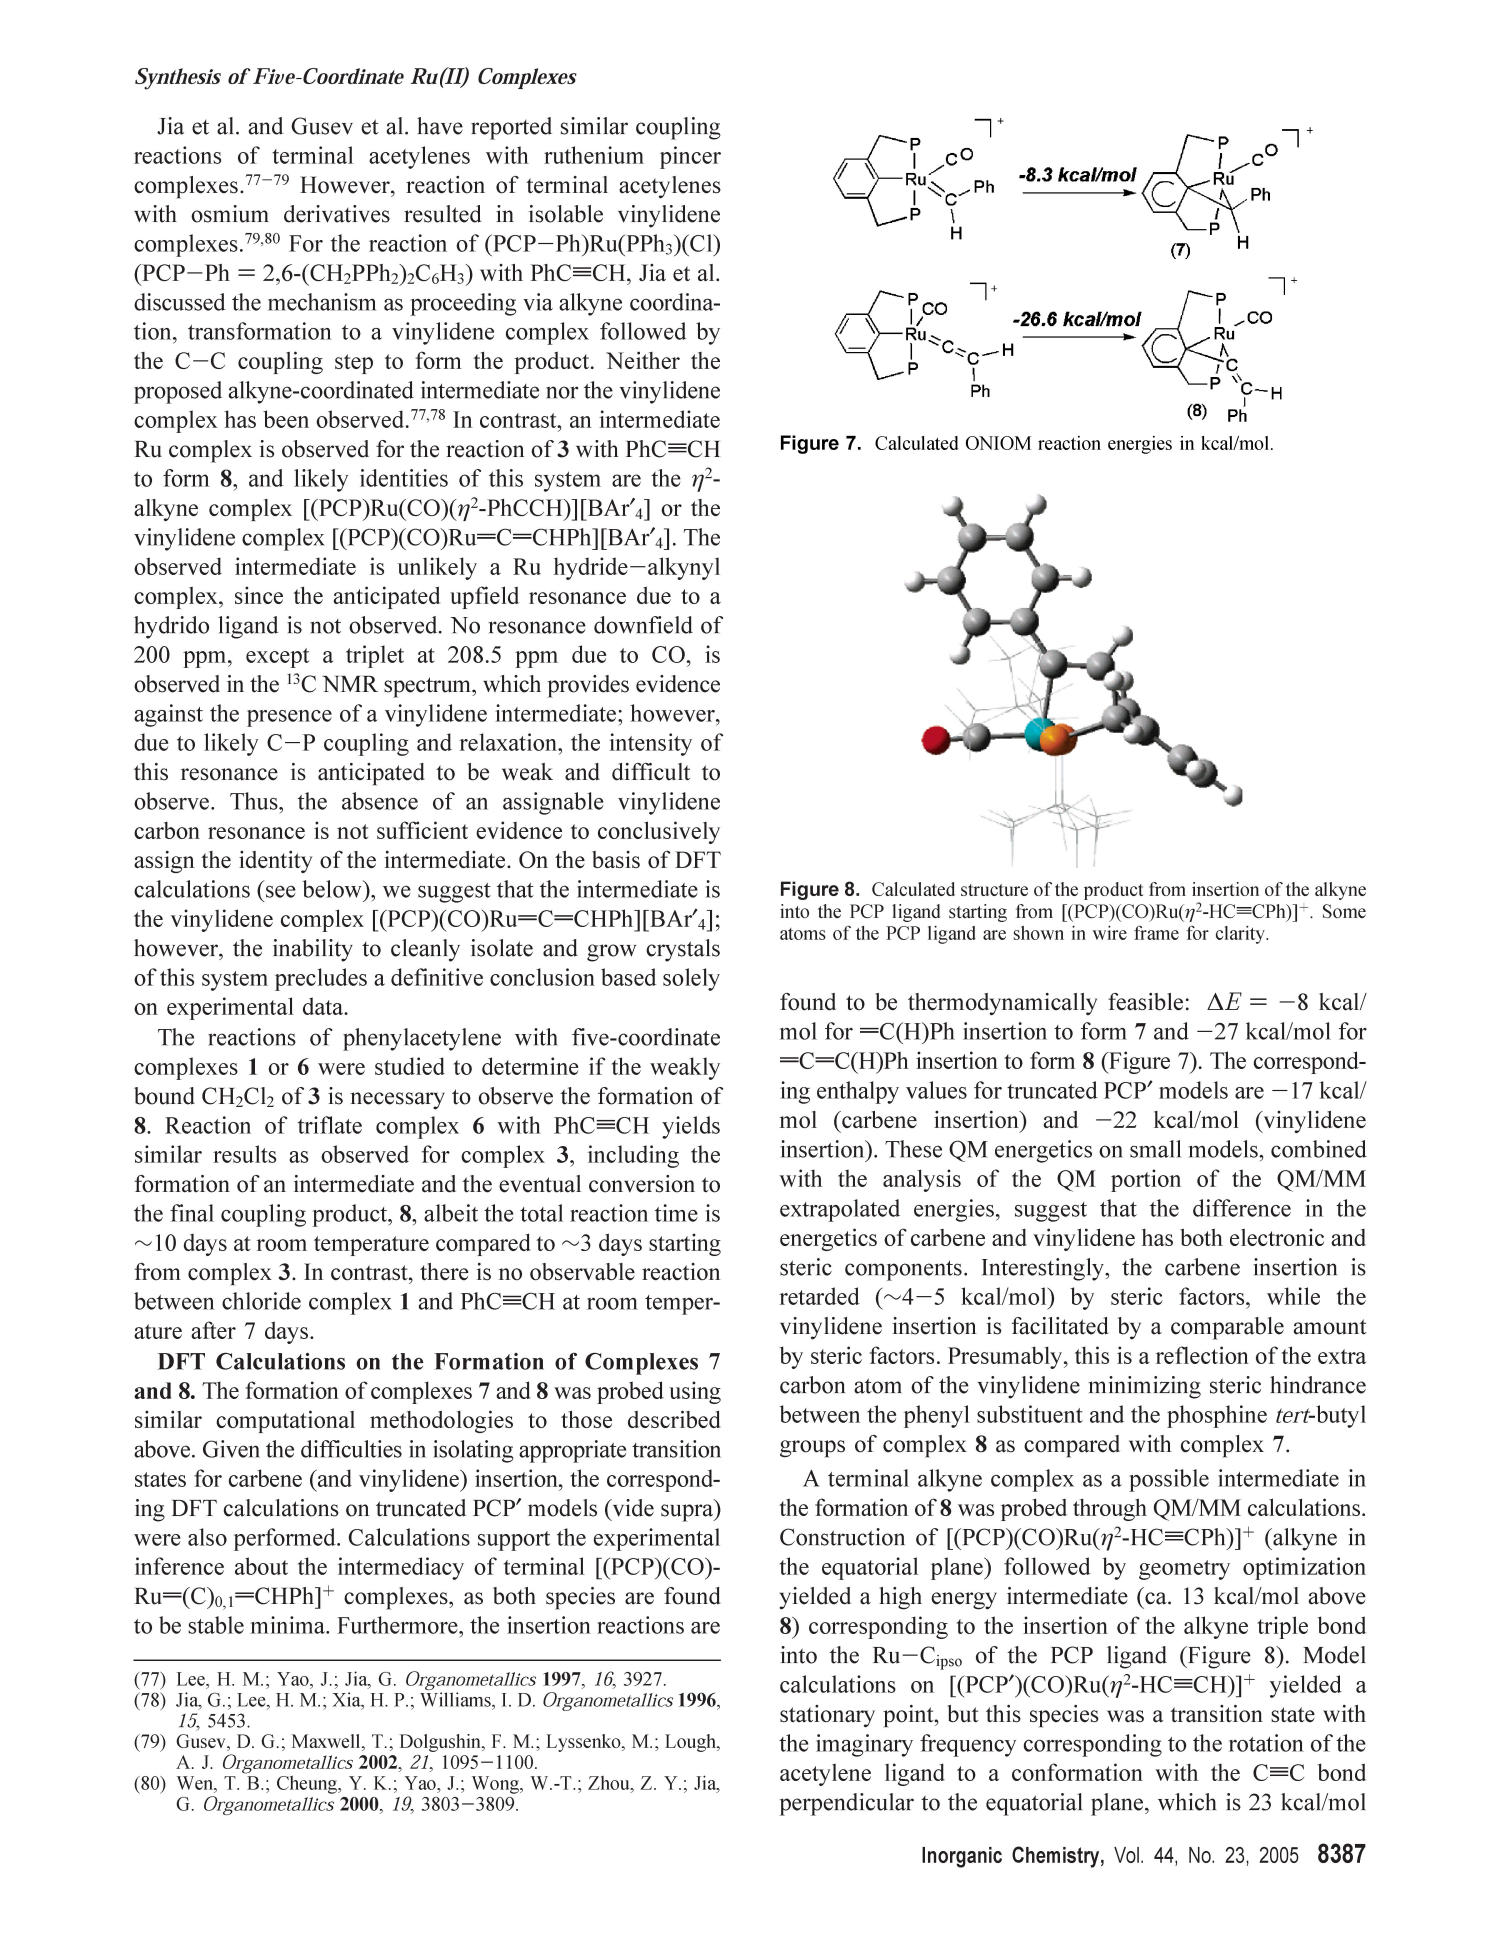 Synthesis Of The Five Coordinate Ruthenium Ii Complexes Pcp Ru Co L Bar 4 Pcp 2 6 Ch2ptbu2 2 C6h3 Bar 4 3 5 Cf3 2c6h3 L ɳ1 Cich2ci ɳ 1 N2 Or M Cl Ru Pcp Co Reactions With Phenyldiazomethane And Phenylacetylene Page 8 387 Unt